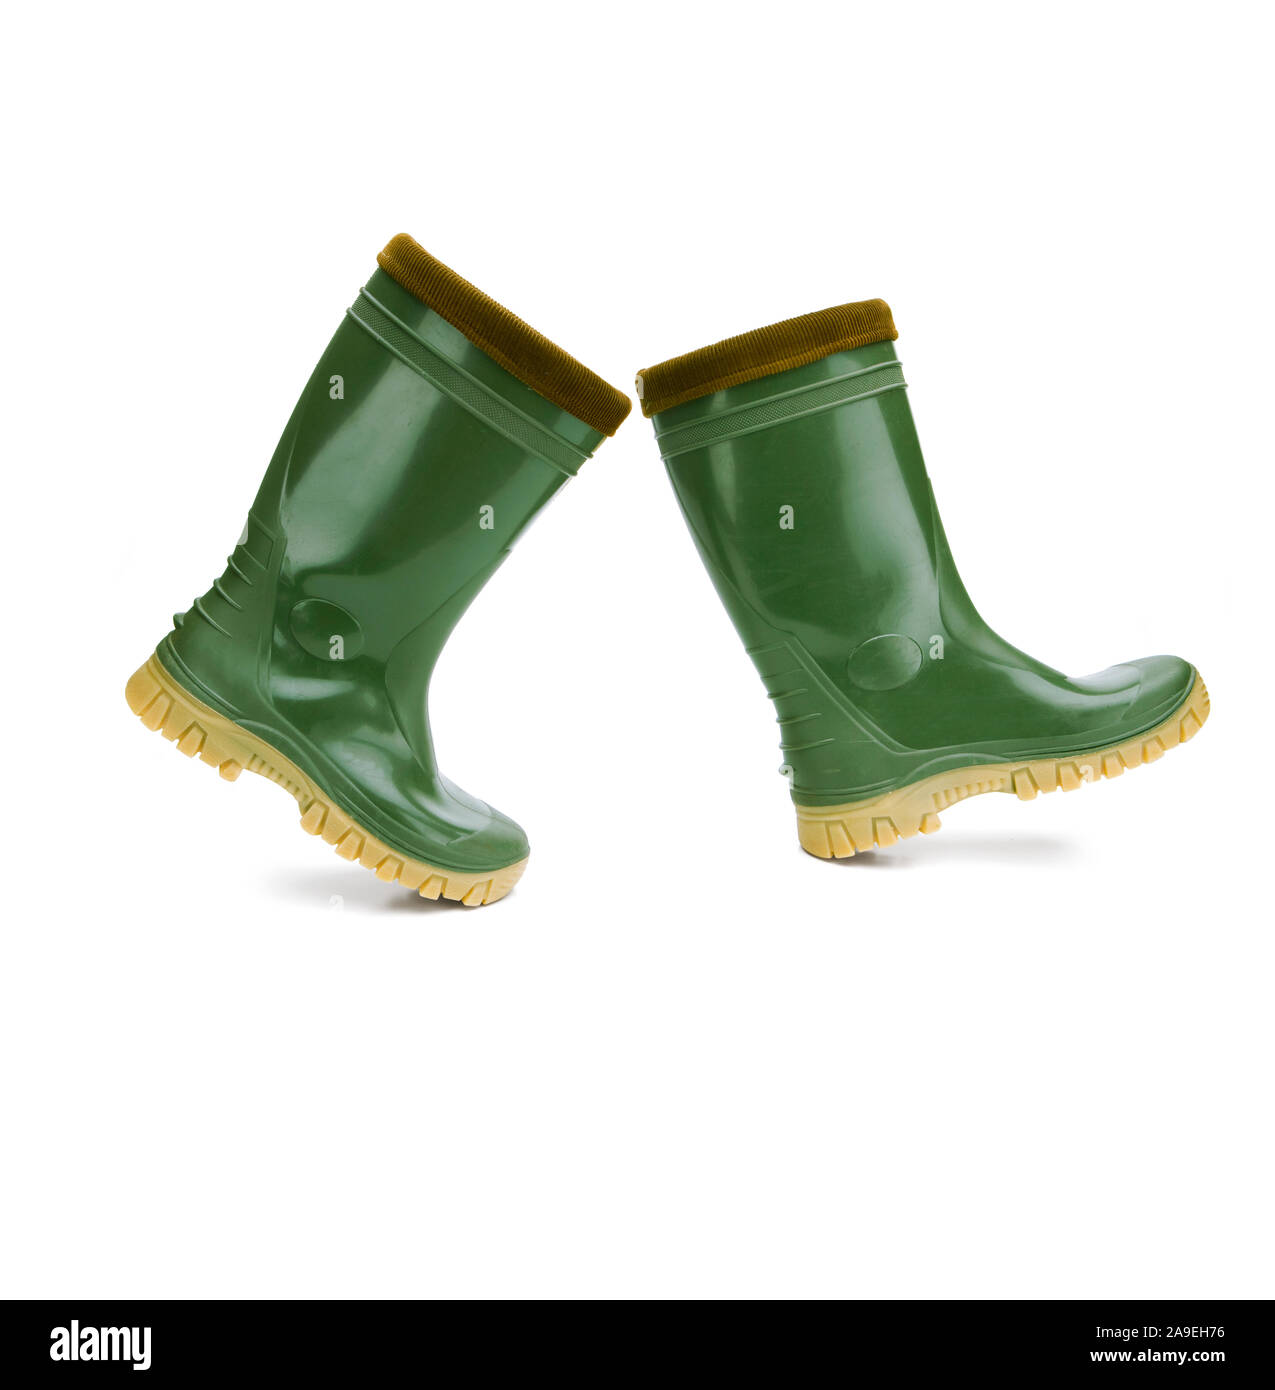 rubber boots Stock Photo